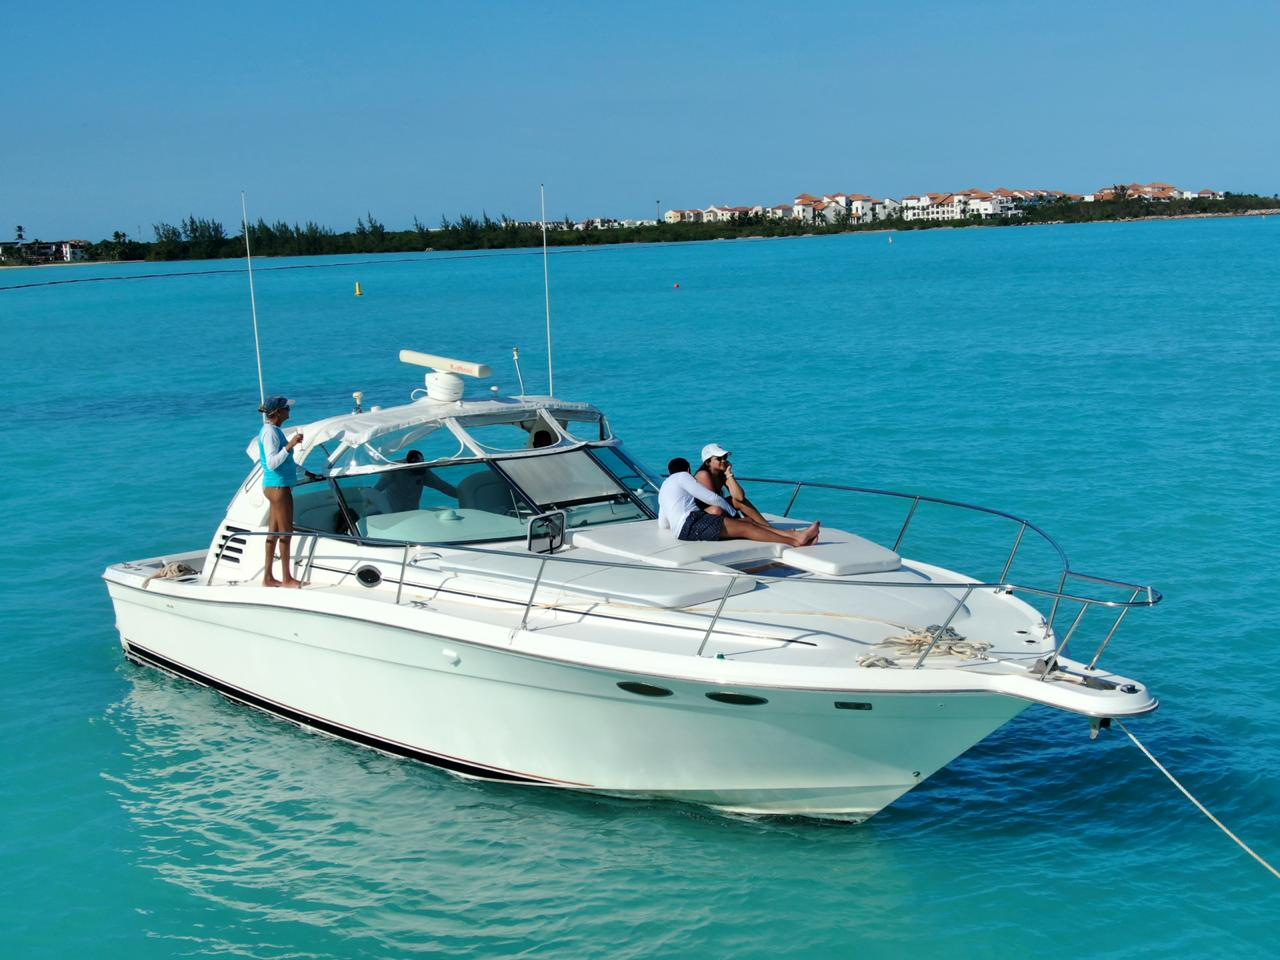 Punta Cana- Cap Cana yacht for rent private tour boat charter